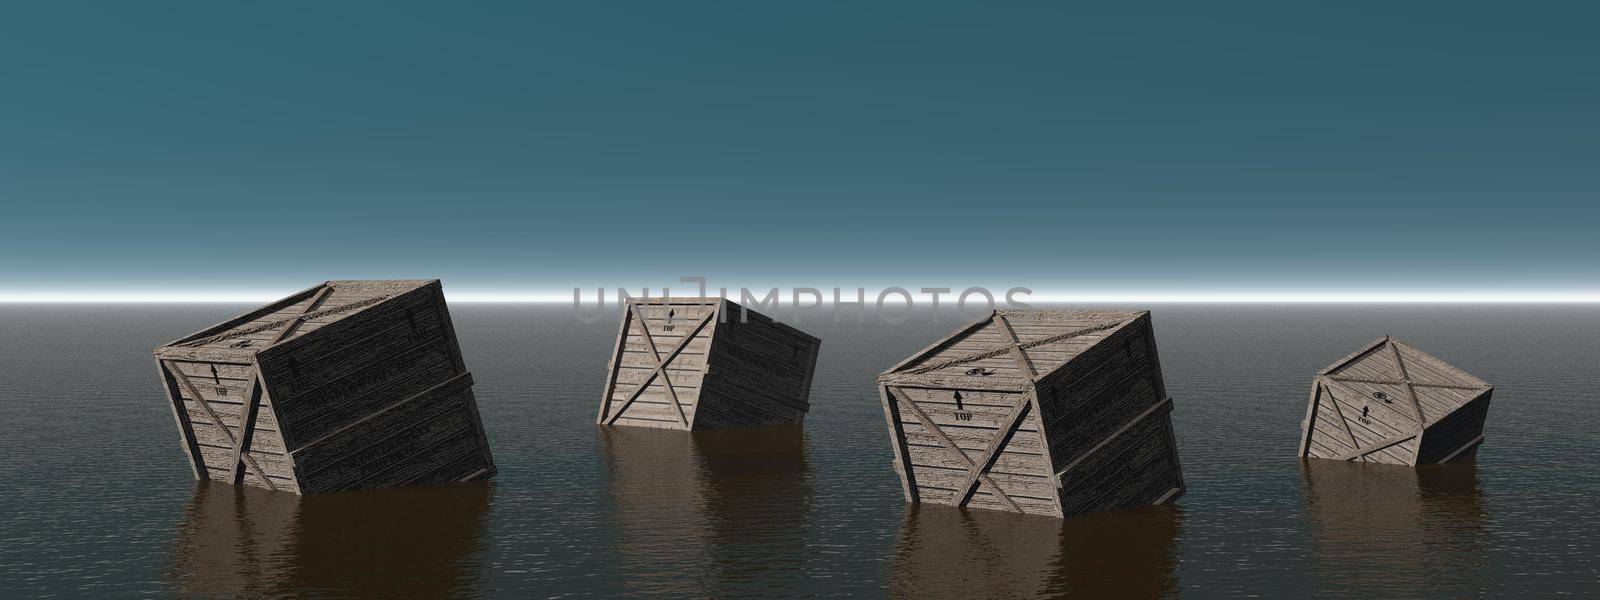 lost box in the middle of the sea and sky - 3d rendering